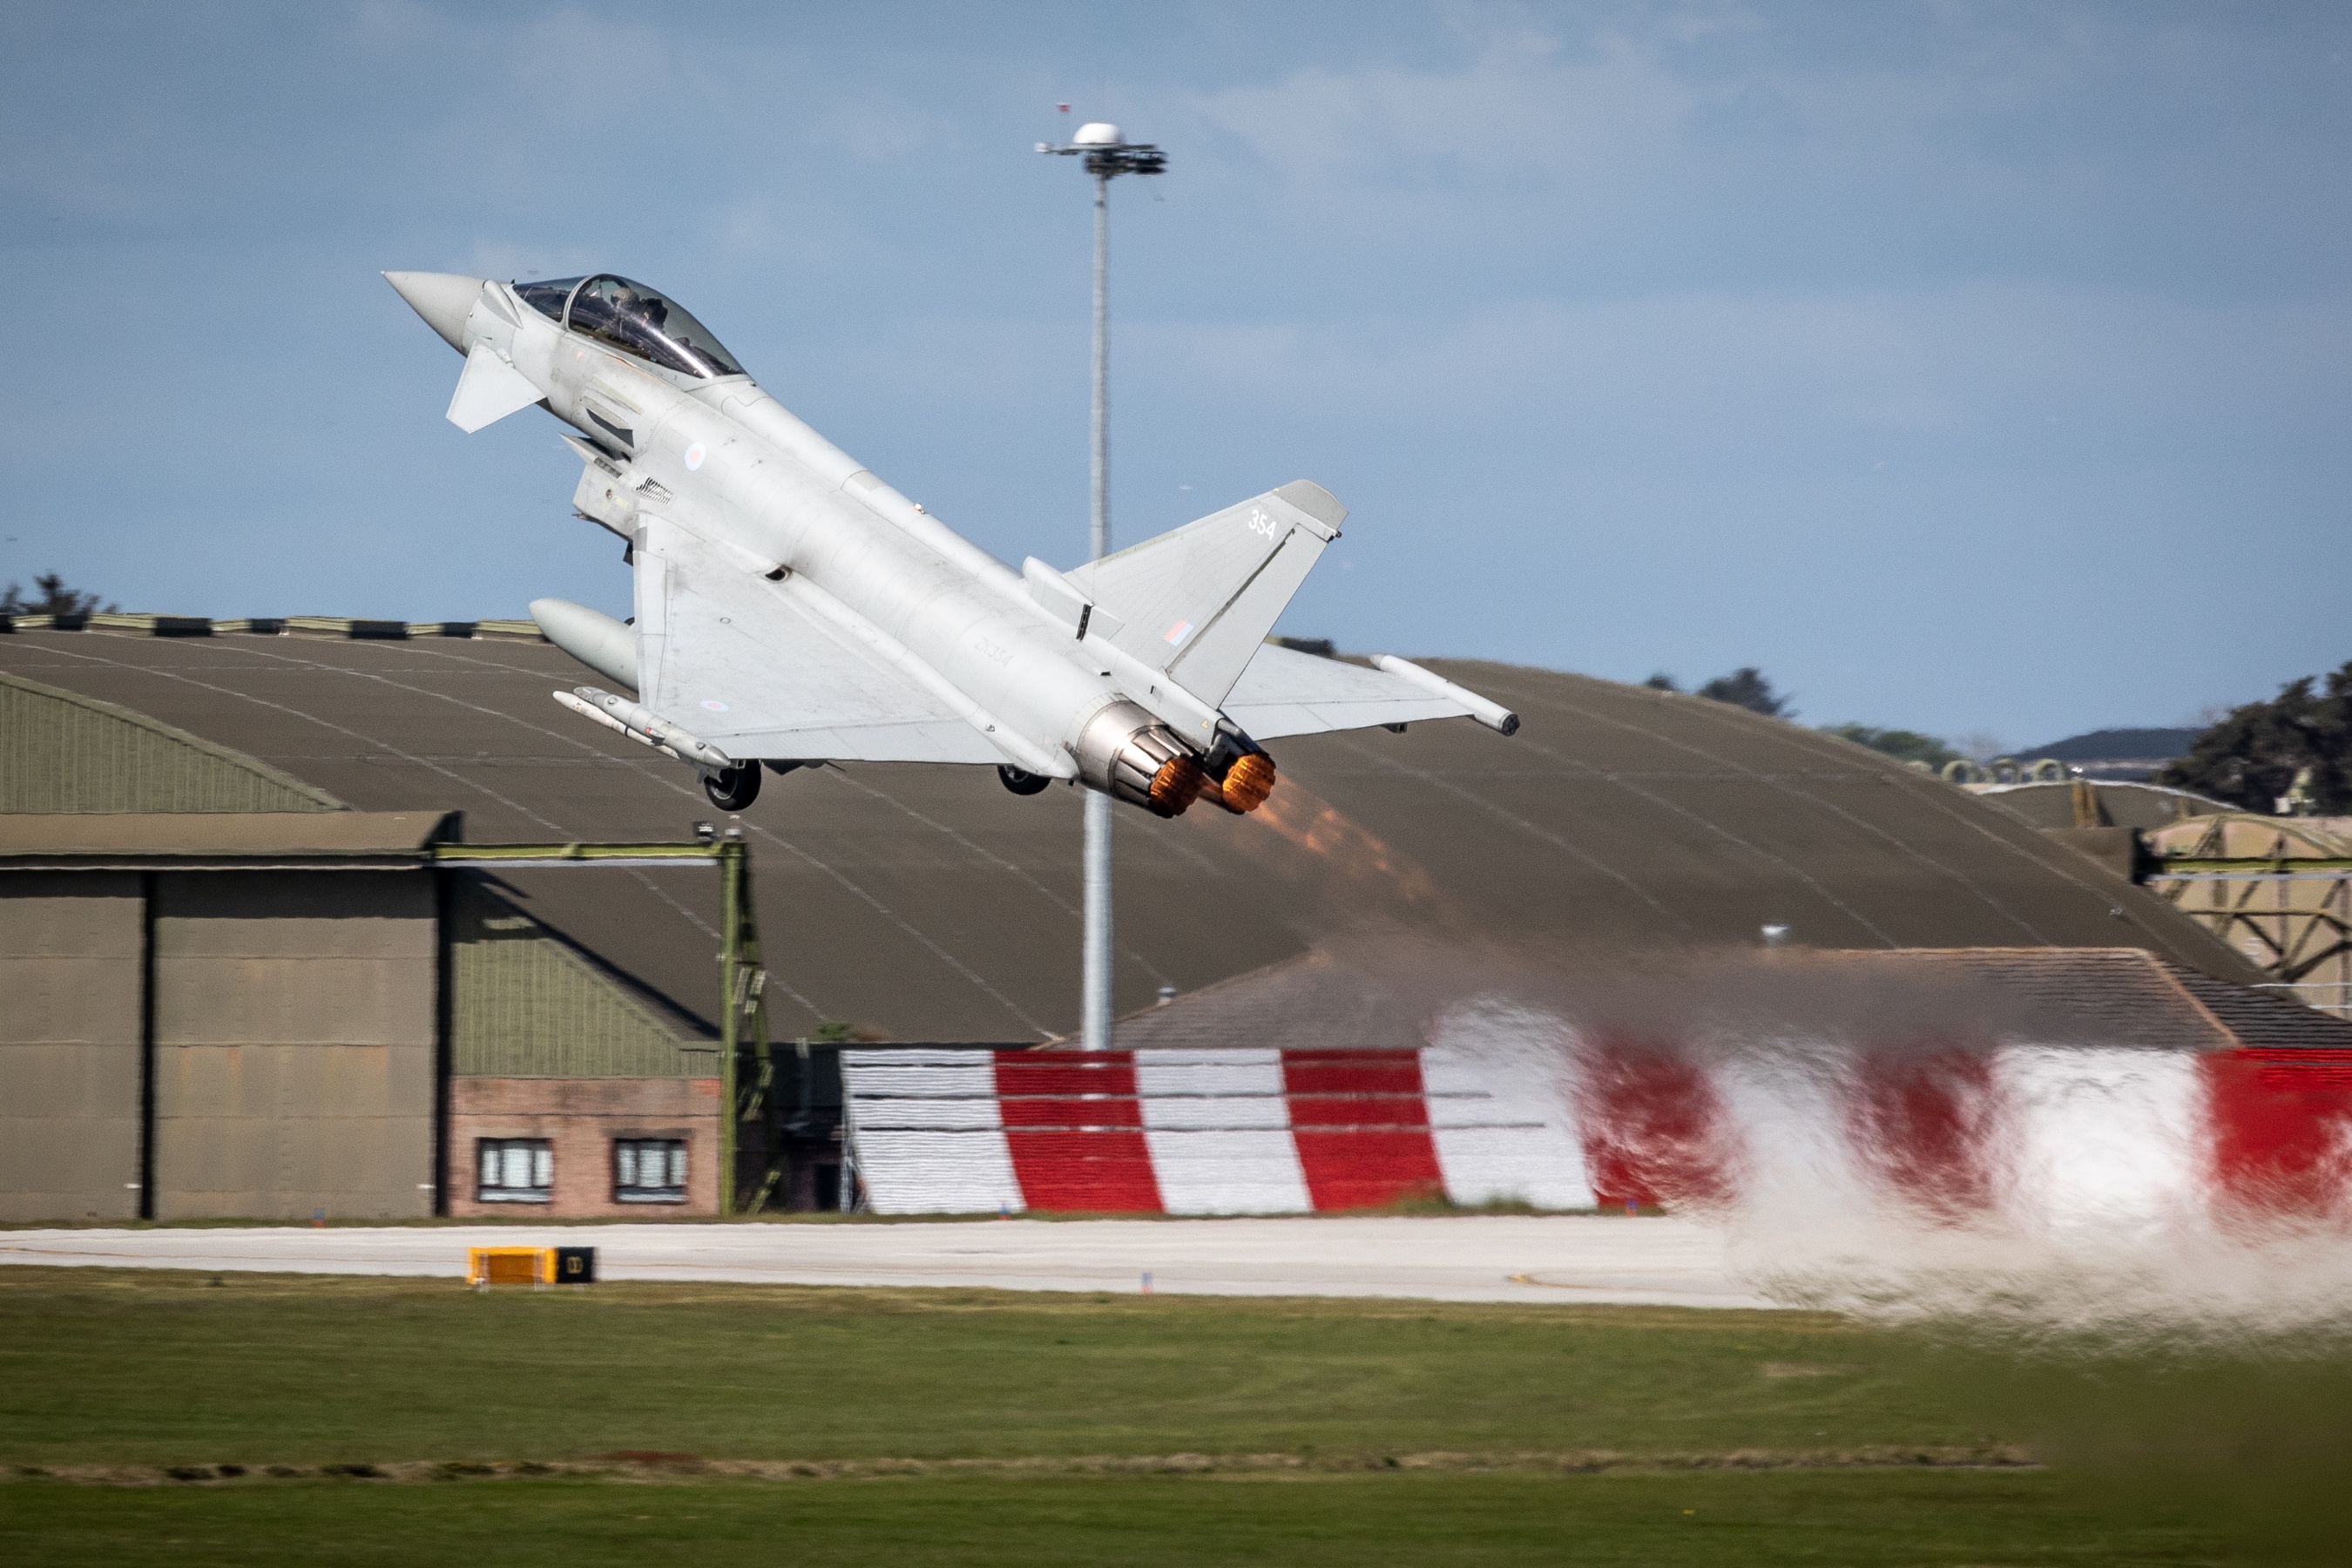 Typhoon taking off from runway.